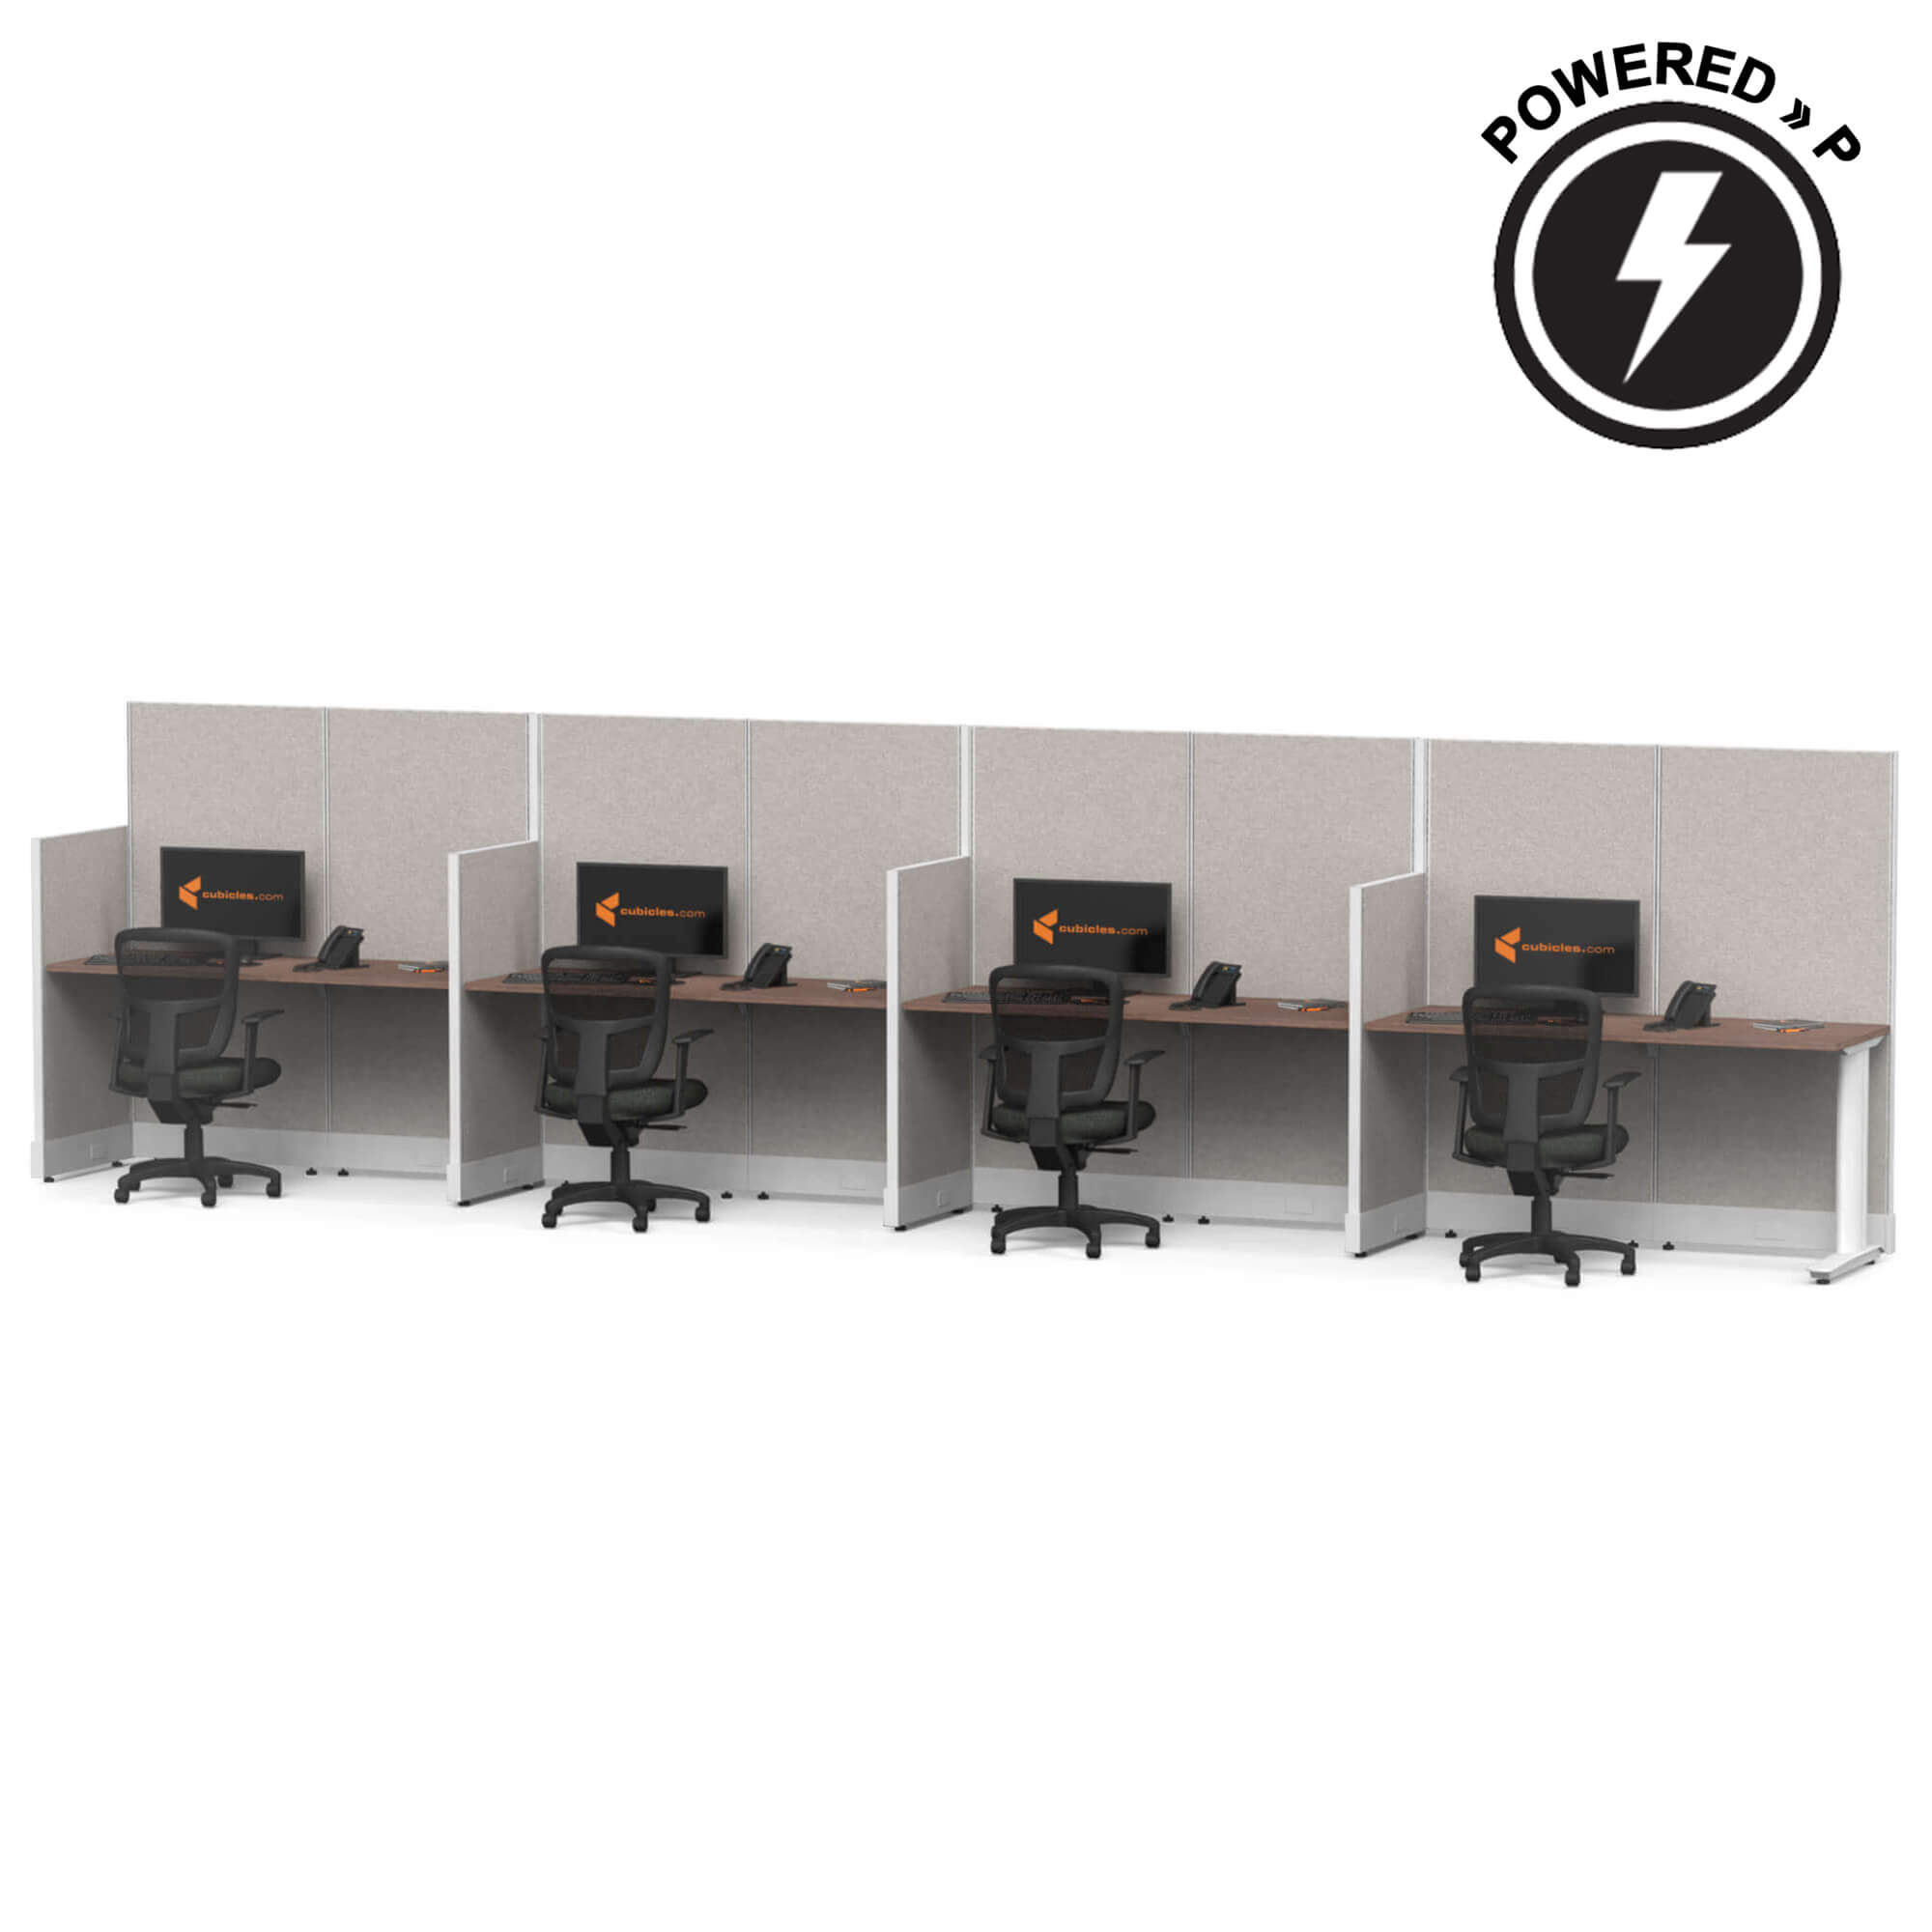 cubicle-desk-straight-workstation-4pack-inline-powered-sign-1-2.jpg